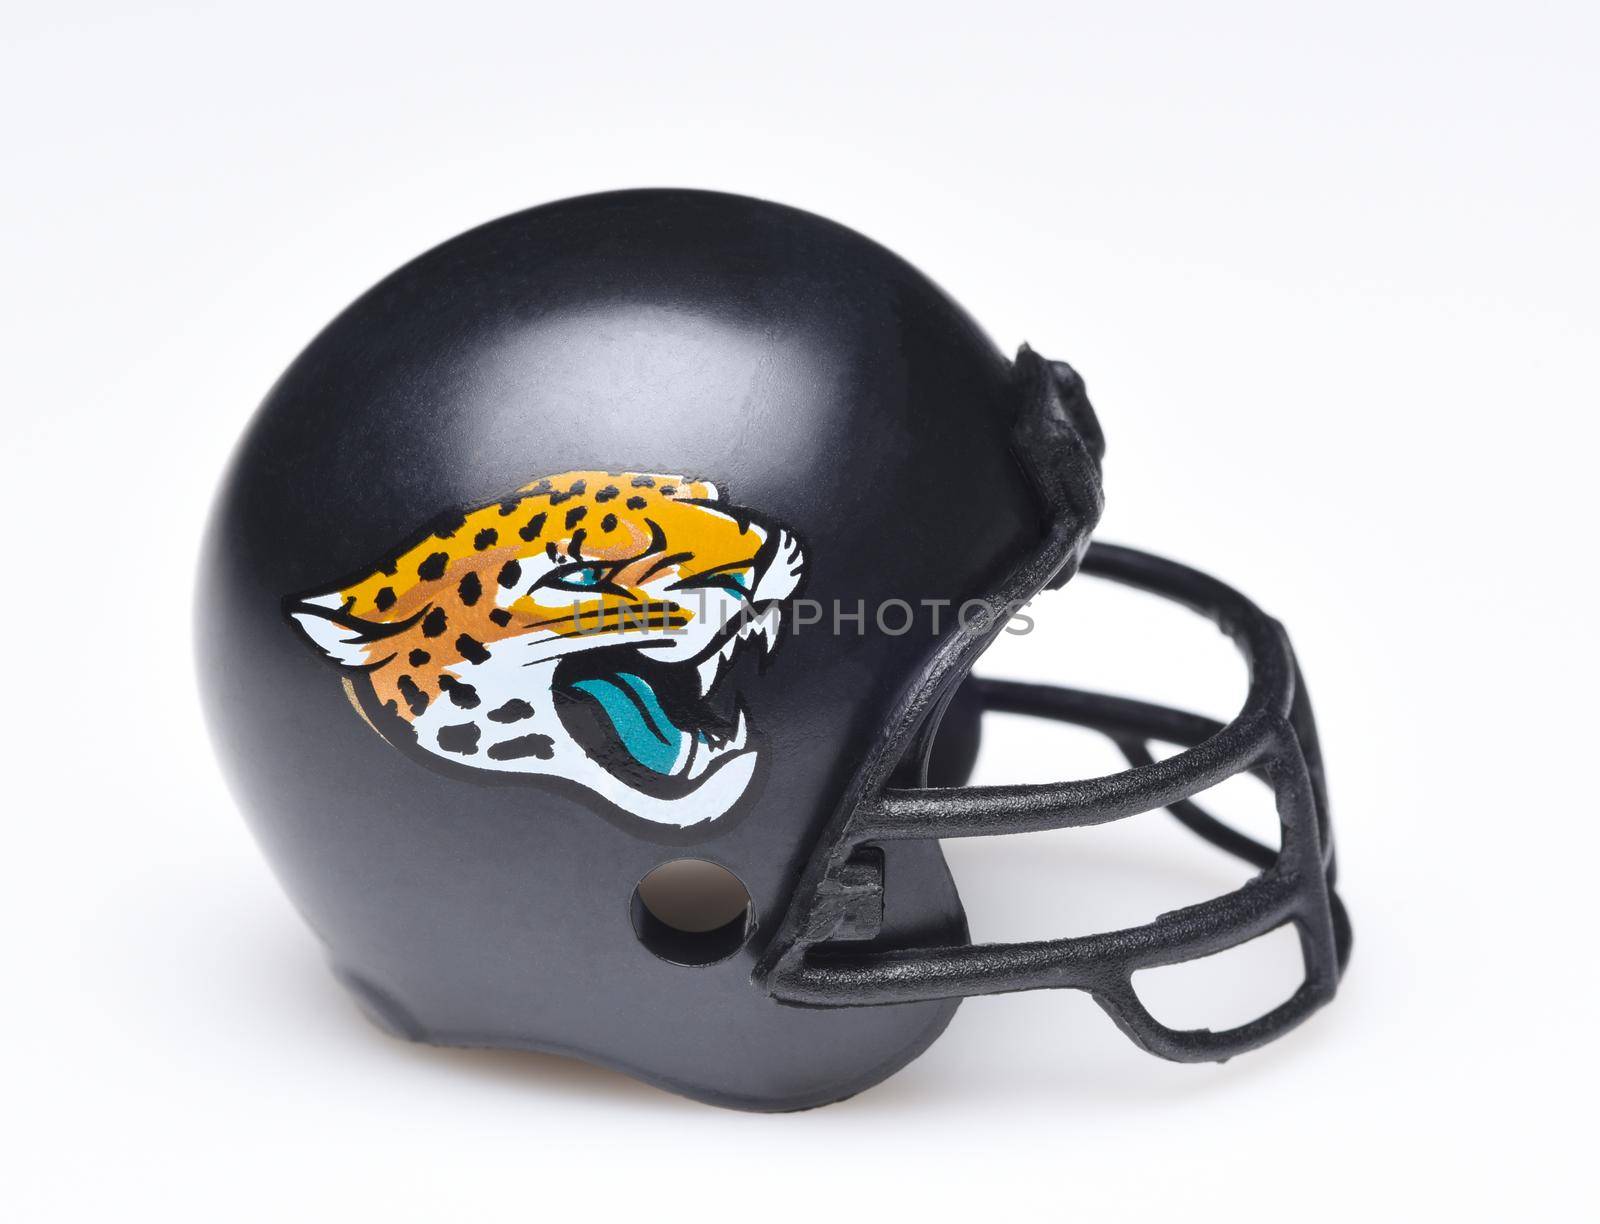 IRVINE, CALIFORNIA - AUGUST 30, 2018: Mini Collectable Football Helmet for the Jacksonville Jaguars of the American Football Conference South.